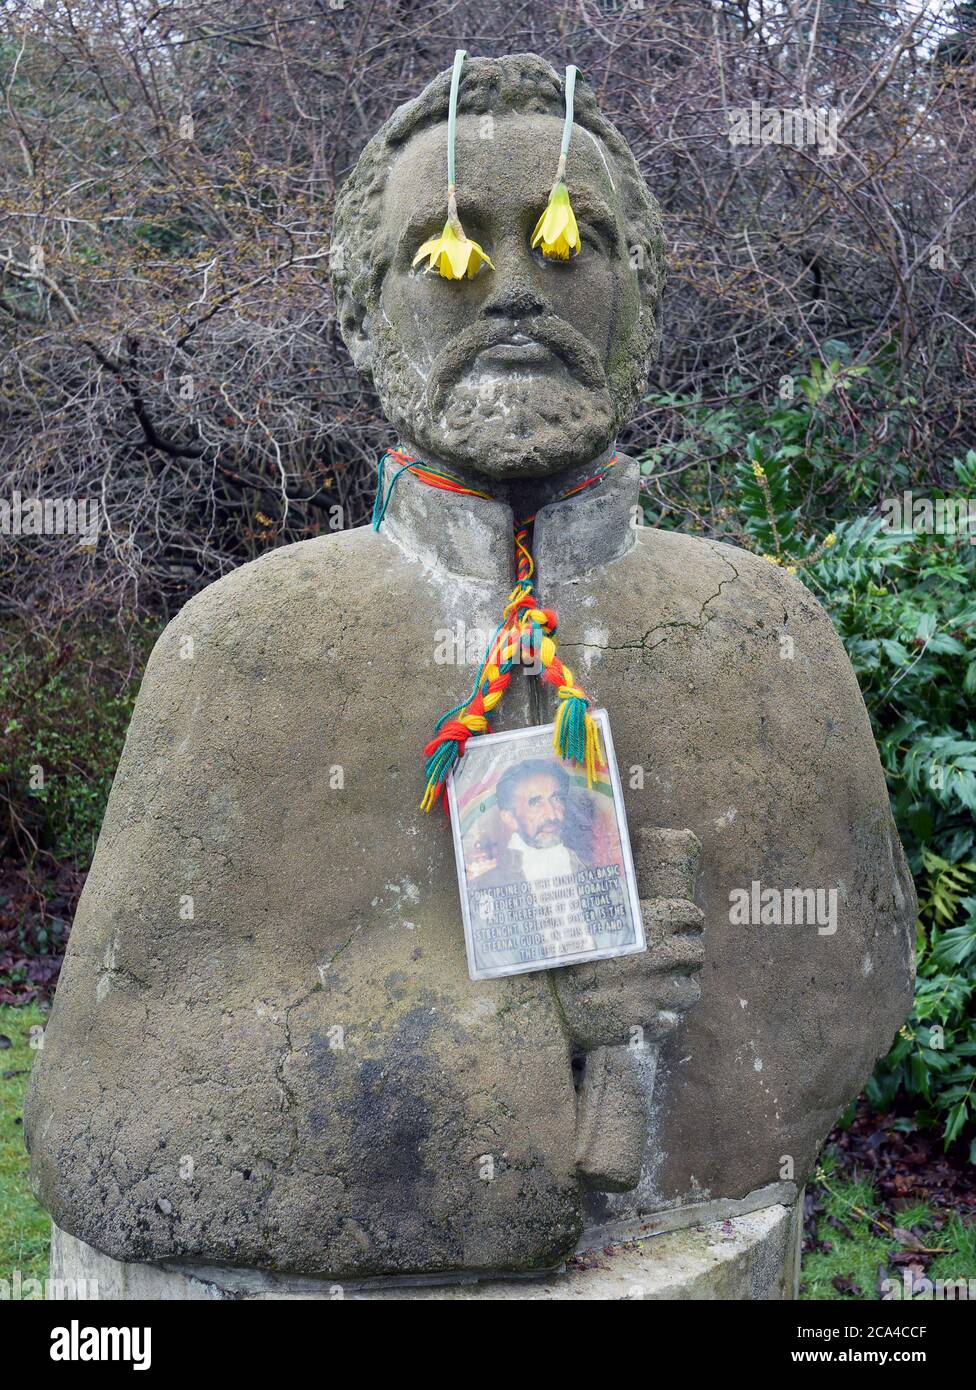 Statue of Haile Selassie in Cannizaro Park, with Daffodils Co ring his eyes, Wimbledon, London SW19. Stock Photo